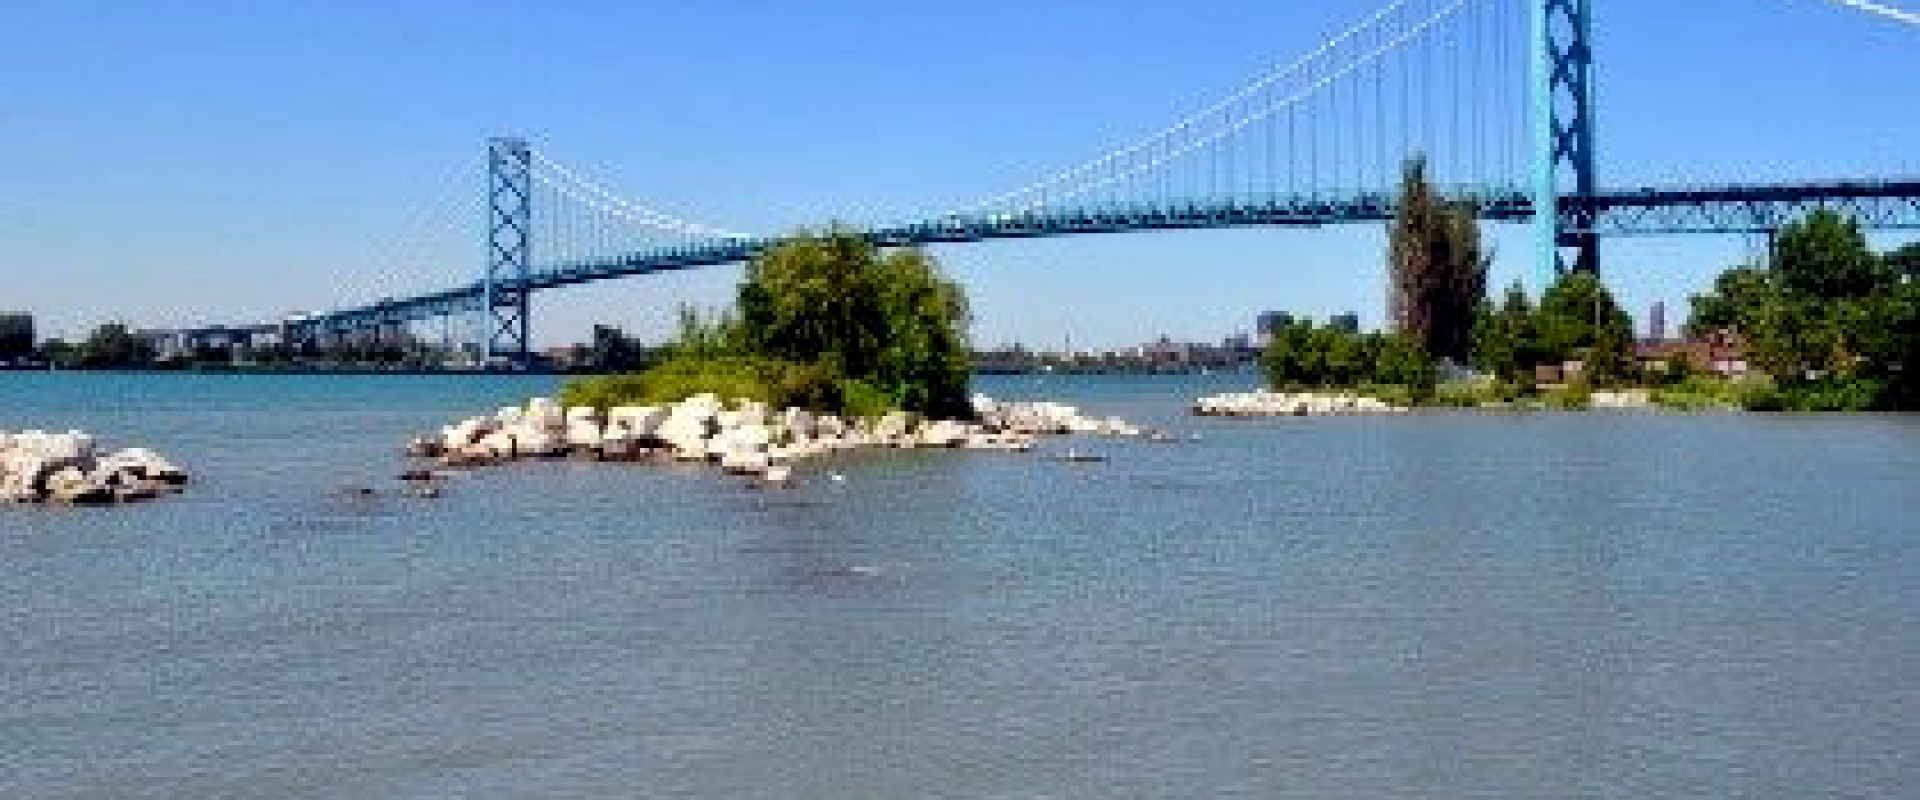 The Ambassador Bridge spanning over the Detroit River from the Canadian side, west of the bridge. 